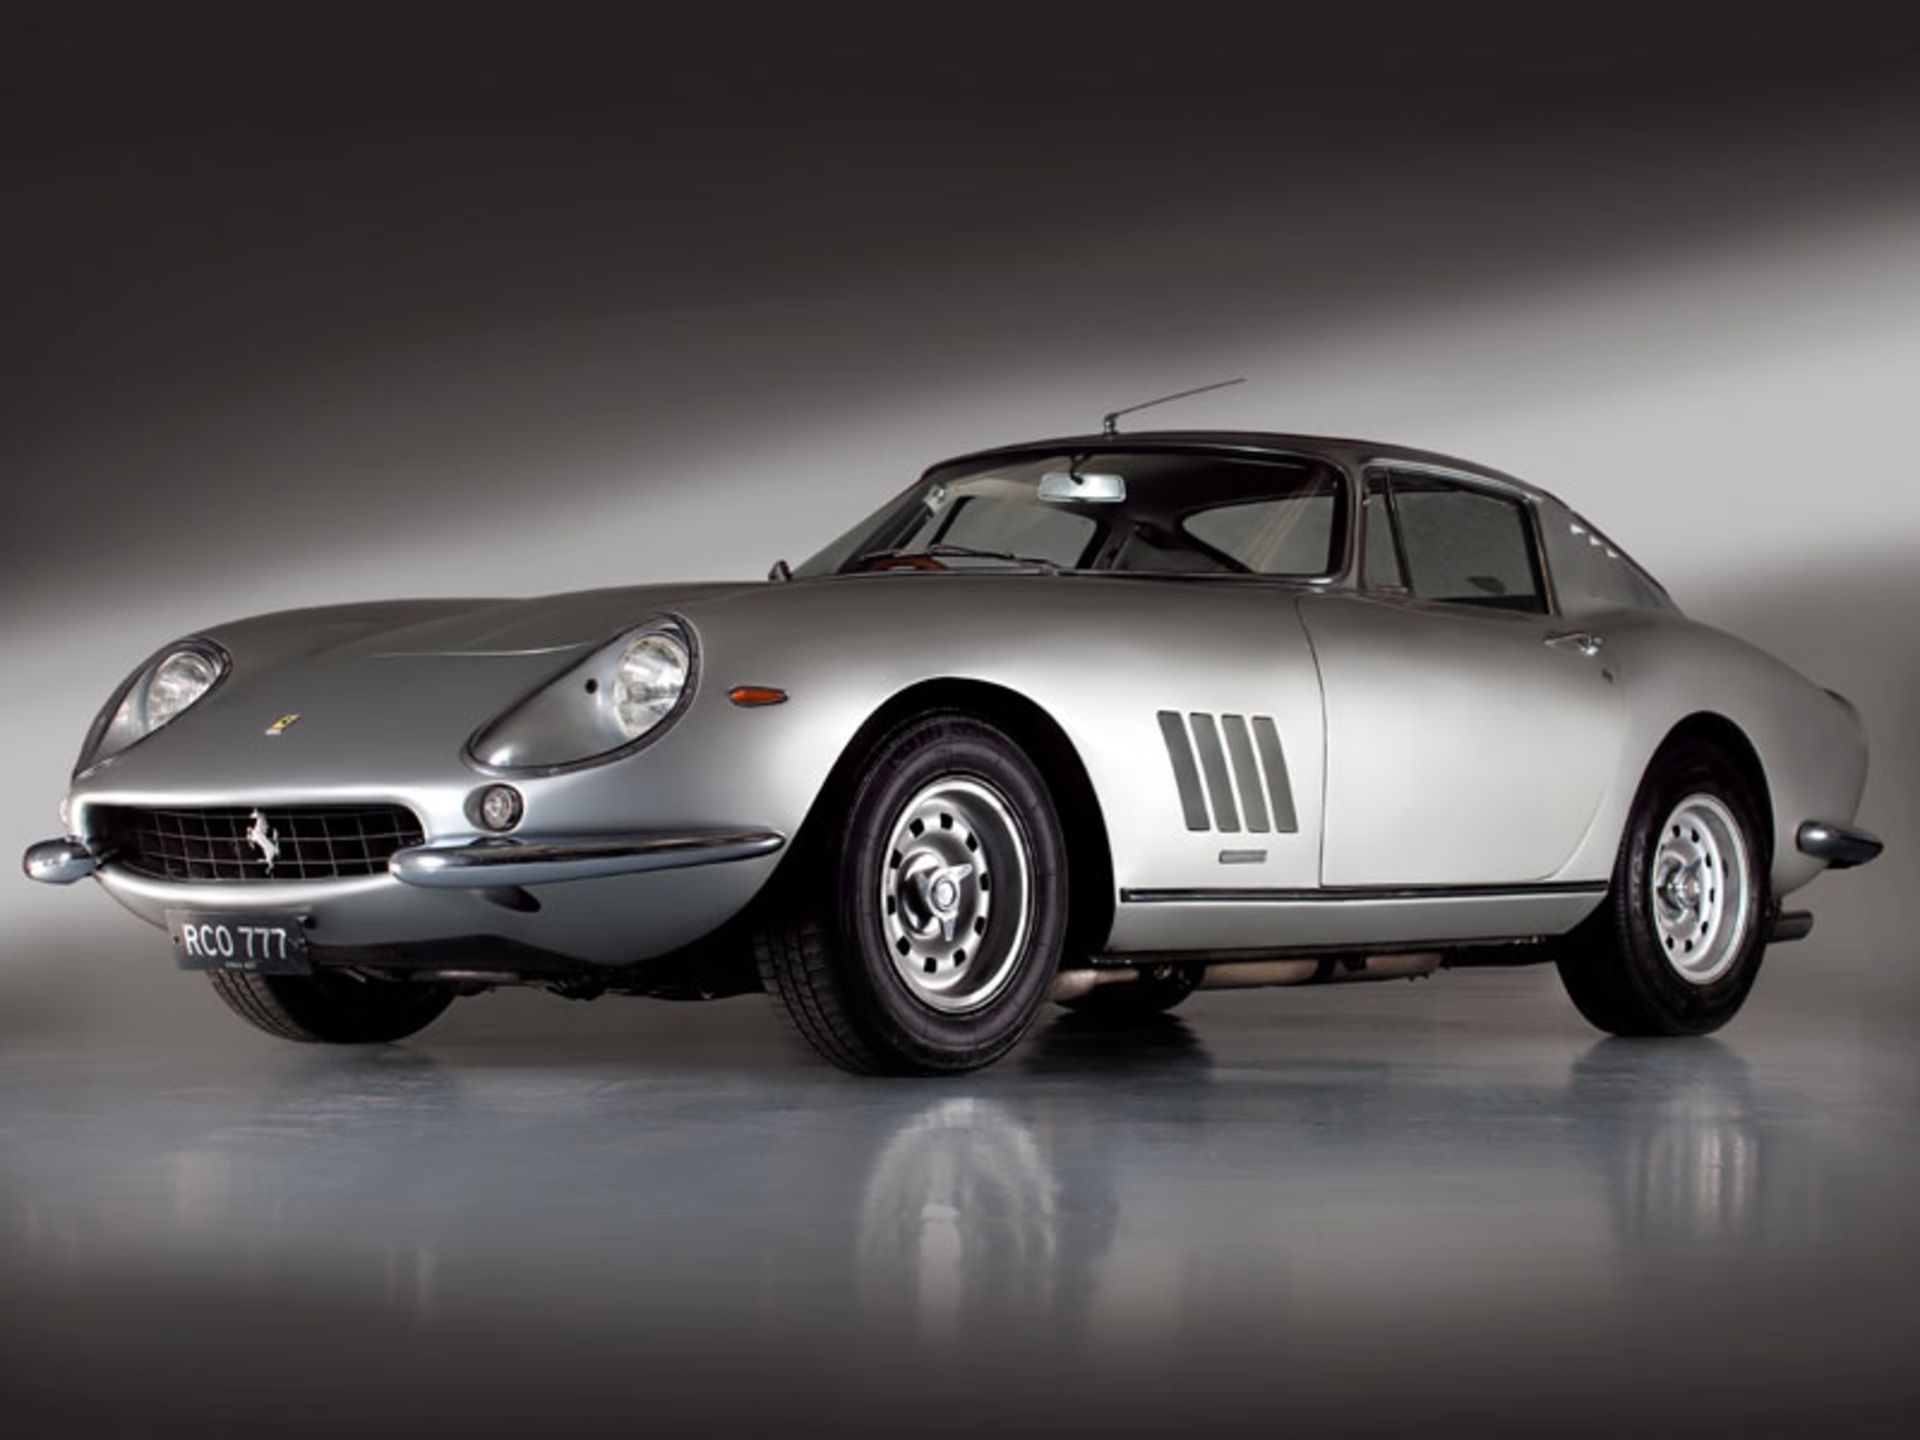 Registering to Bid on the Ferrari 275 GTB/4 from the Richard Colton Collection:
- All Registrations